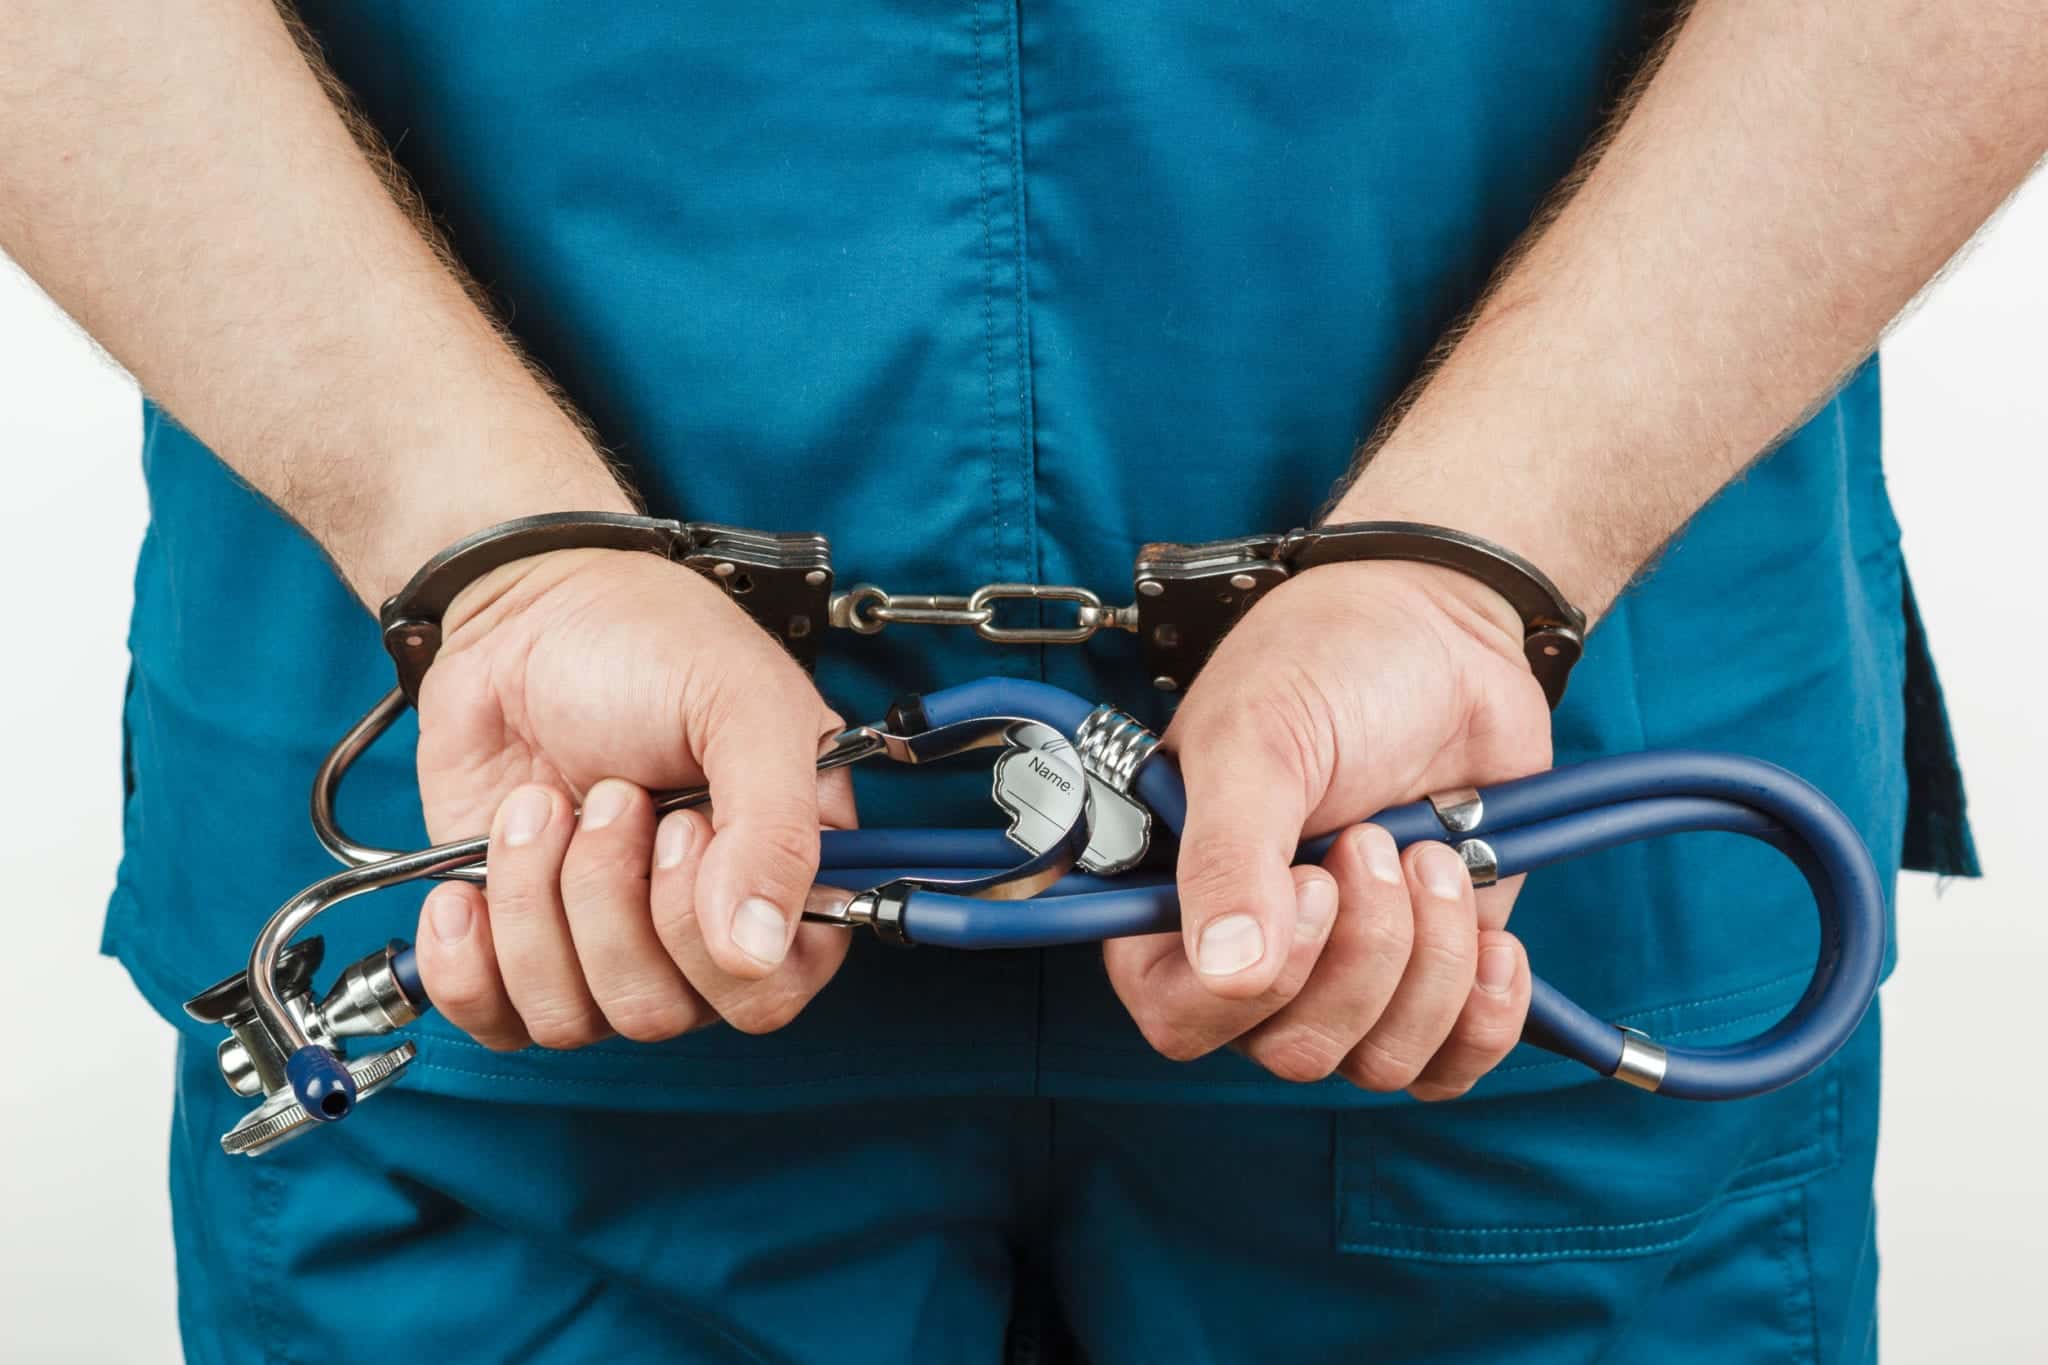 What Are Some of the Penalties for Tele-health Fraud in Texas?